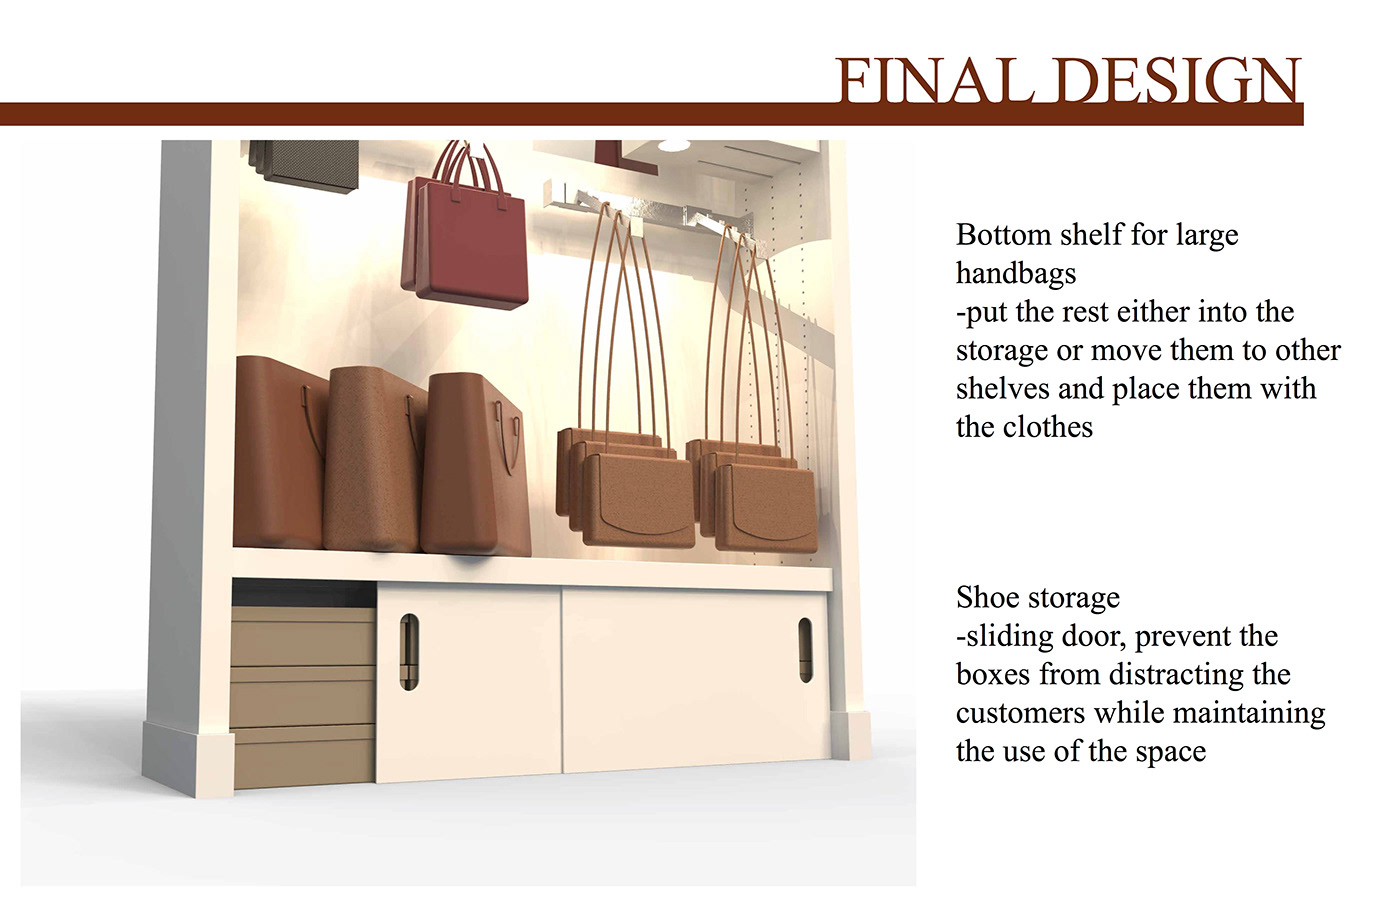 Shelving store redesign Retail design Retail Solidworks digital mall Clothing research